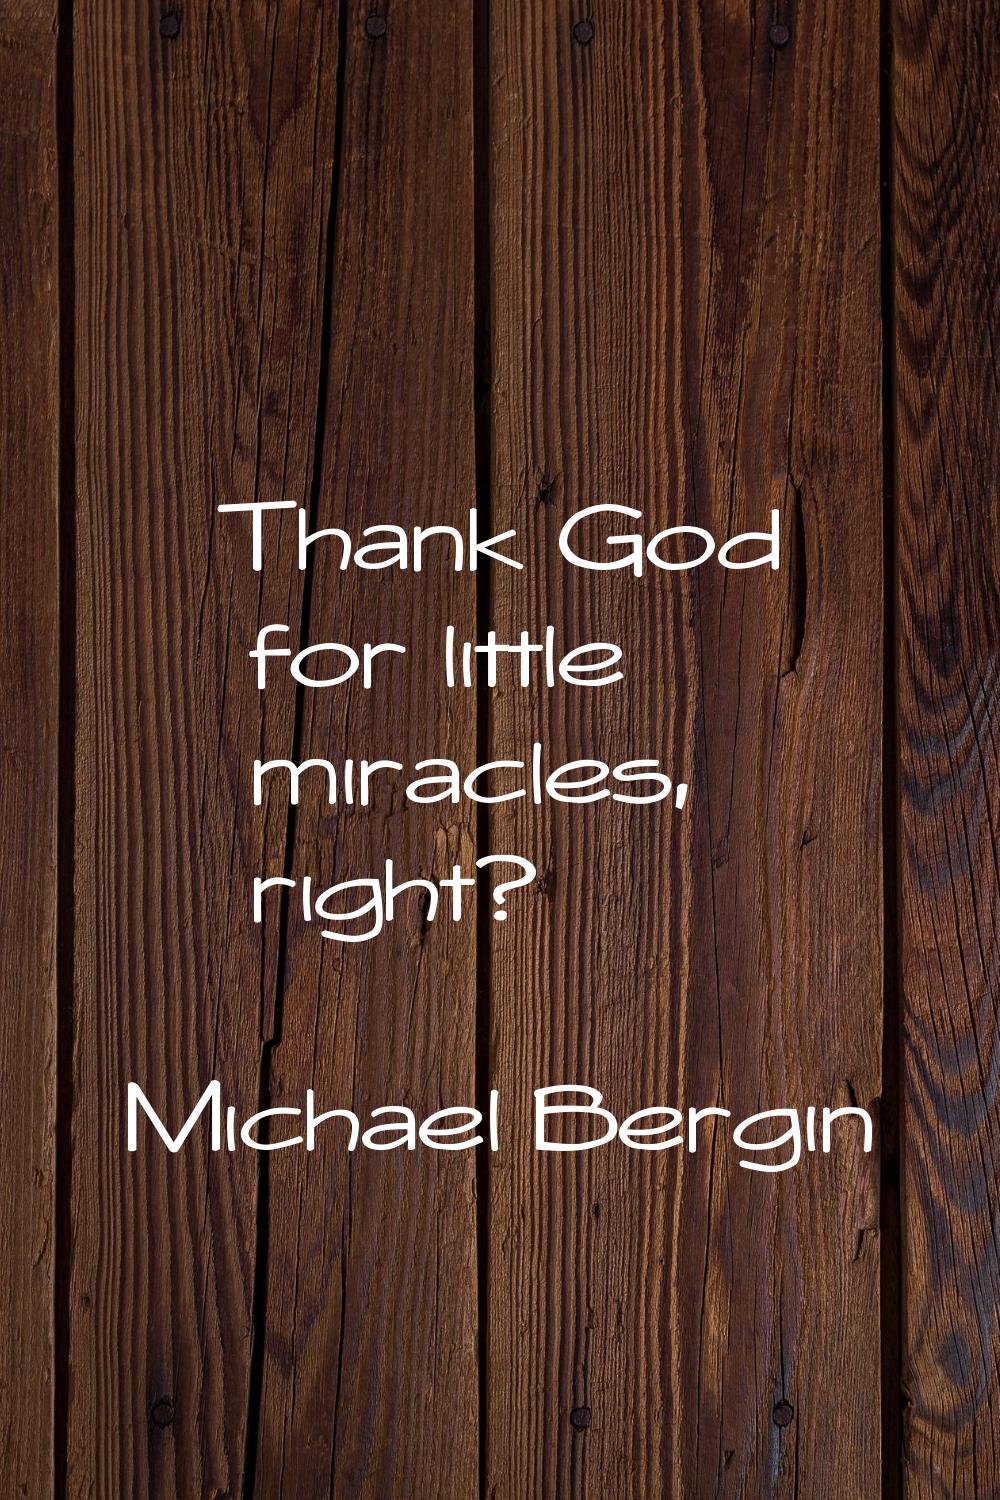 Thank God for little miracles, right?